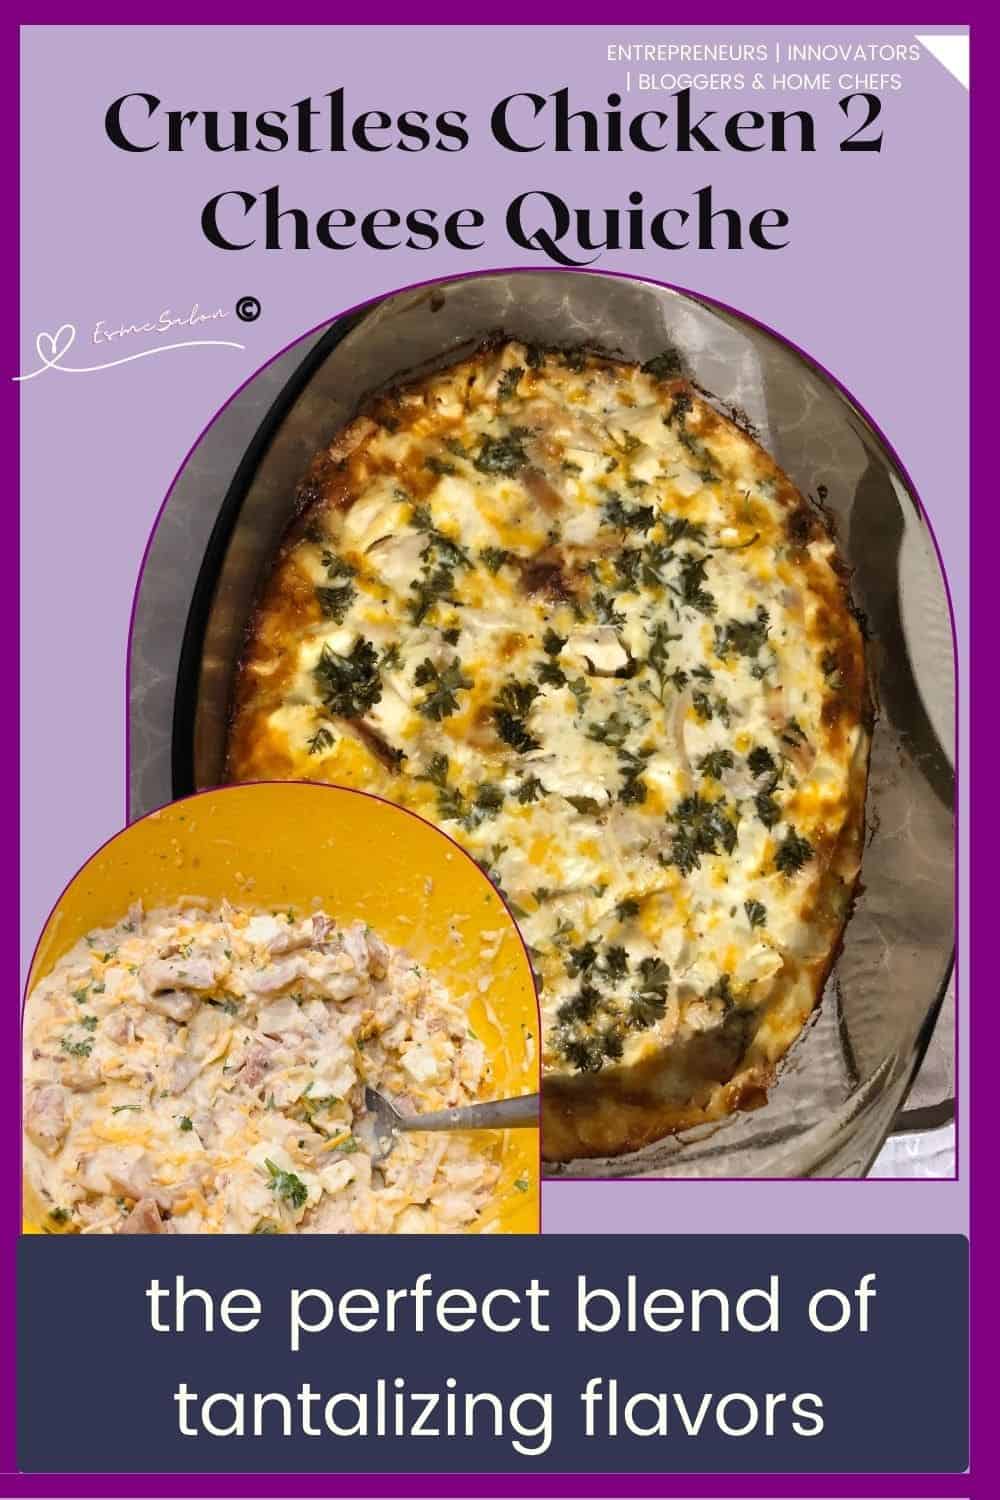 an image of a Crustless Chicken 2 Cheese Quiche in a brown casserole dish